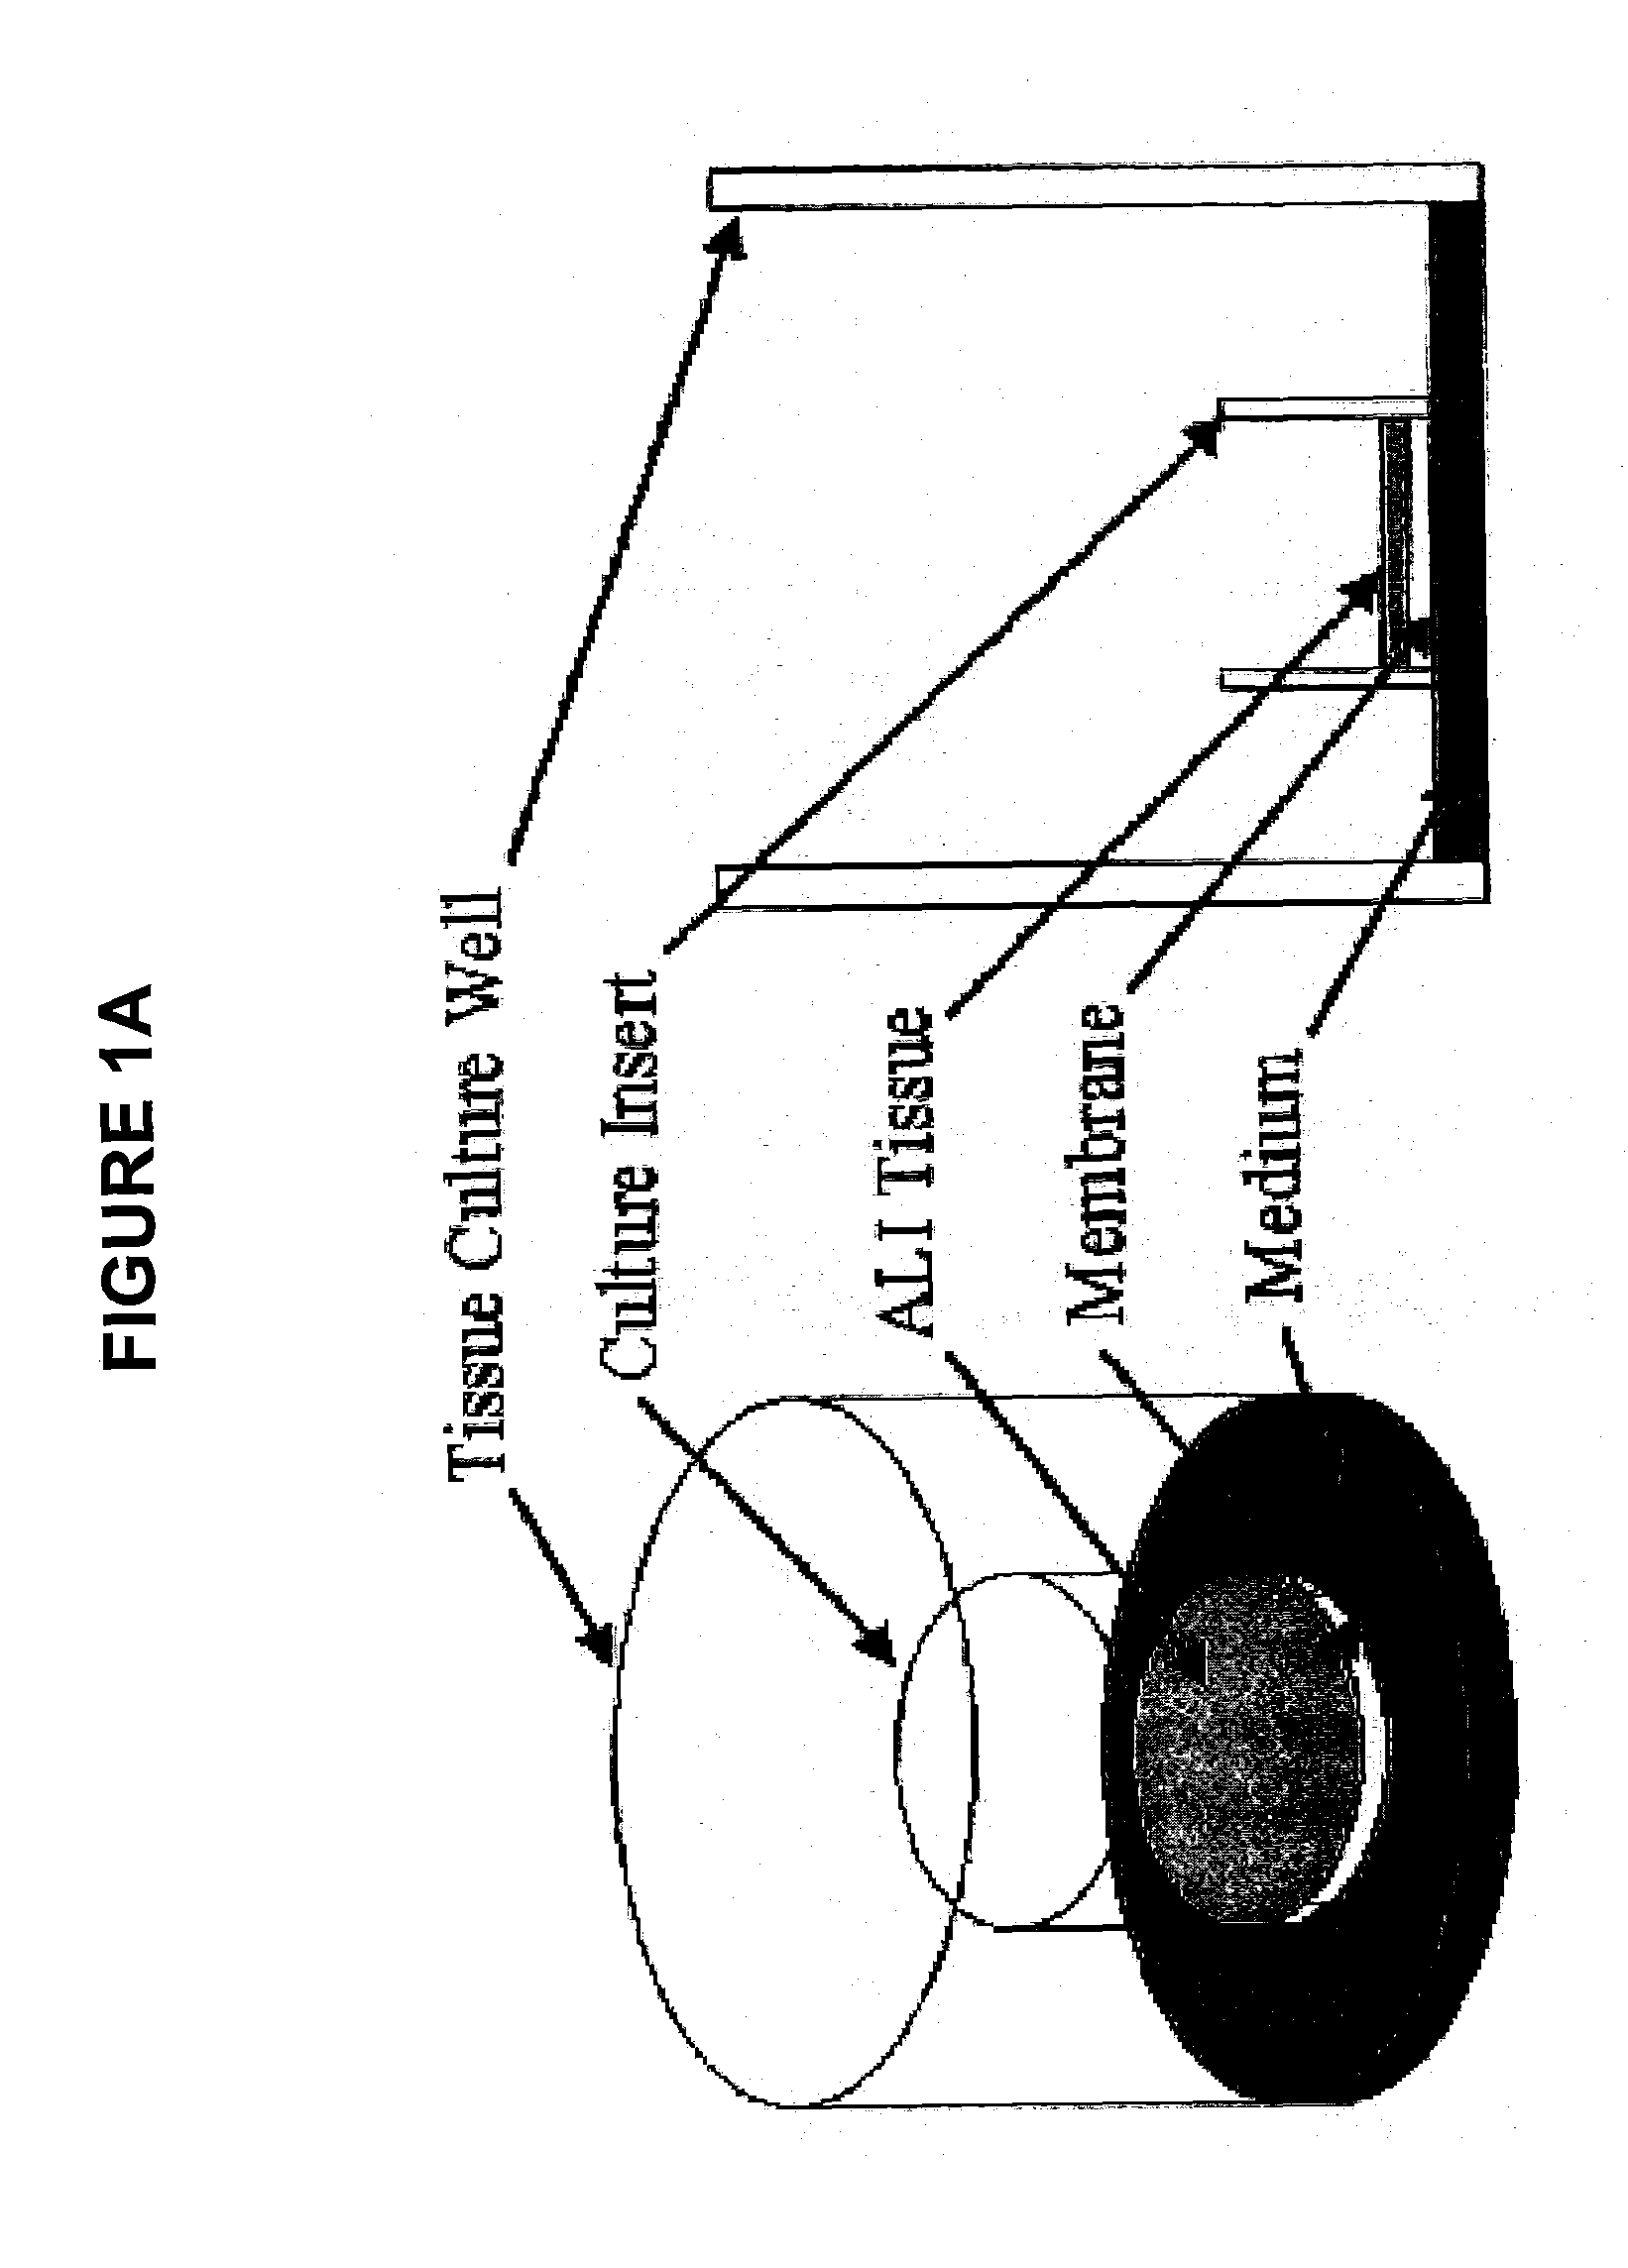 Method for Predicting Respiratory Toxicity of Compounds